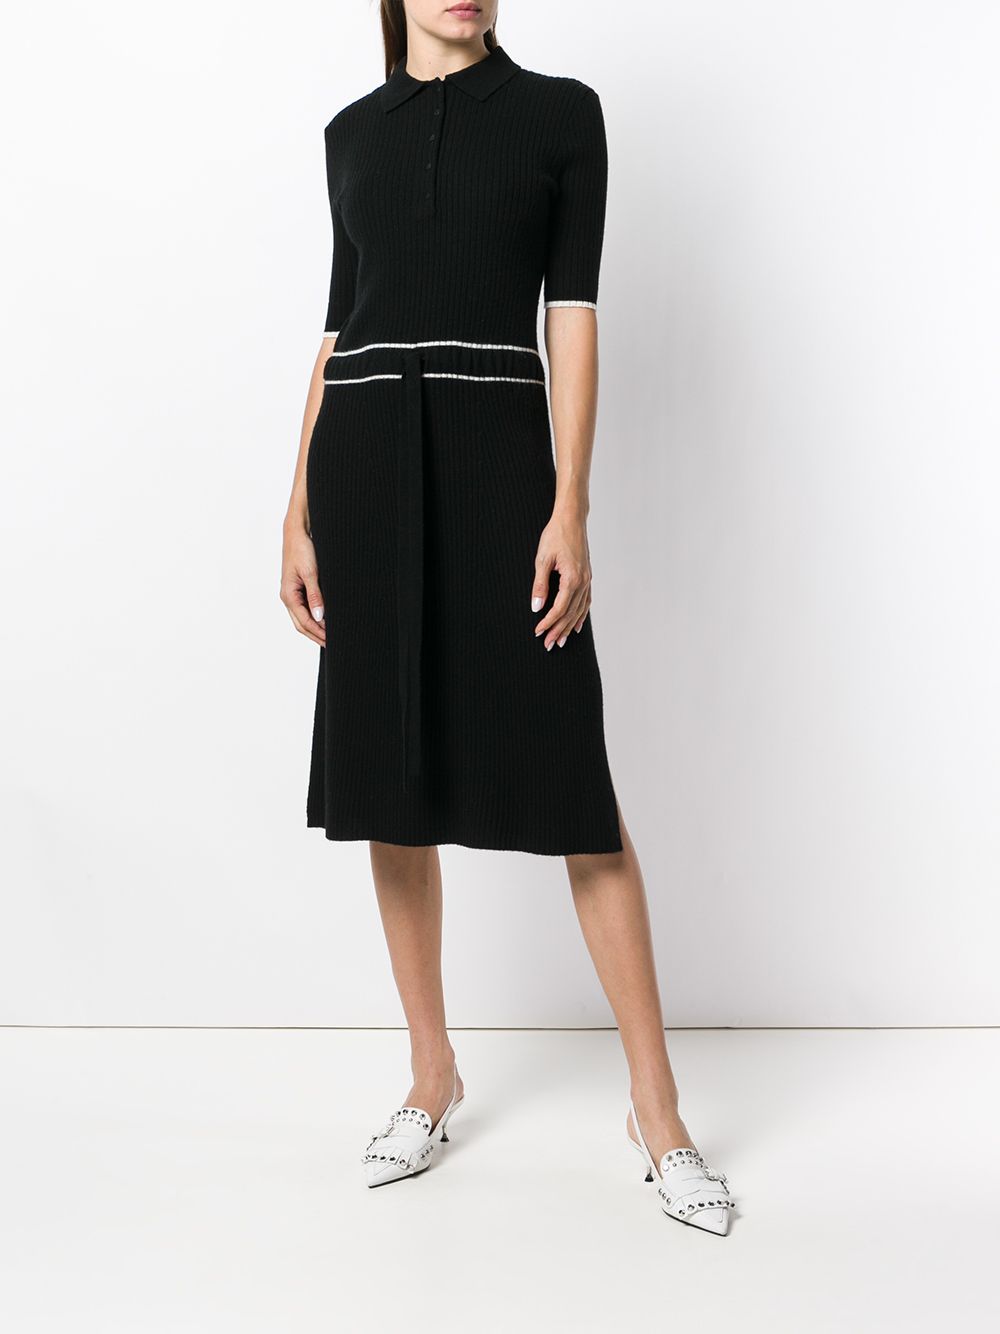 Cashmere In Love Cashmere Blend Ribbed Knit Dress - Farfetch